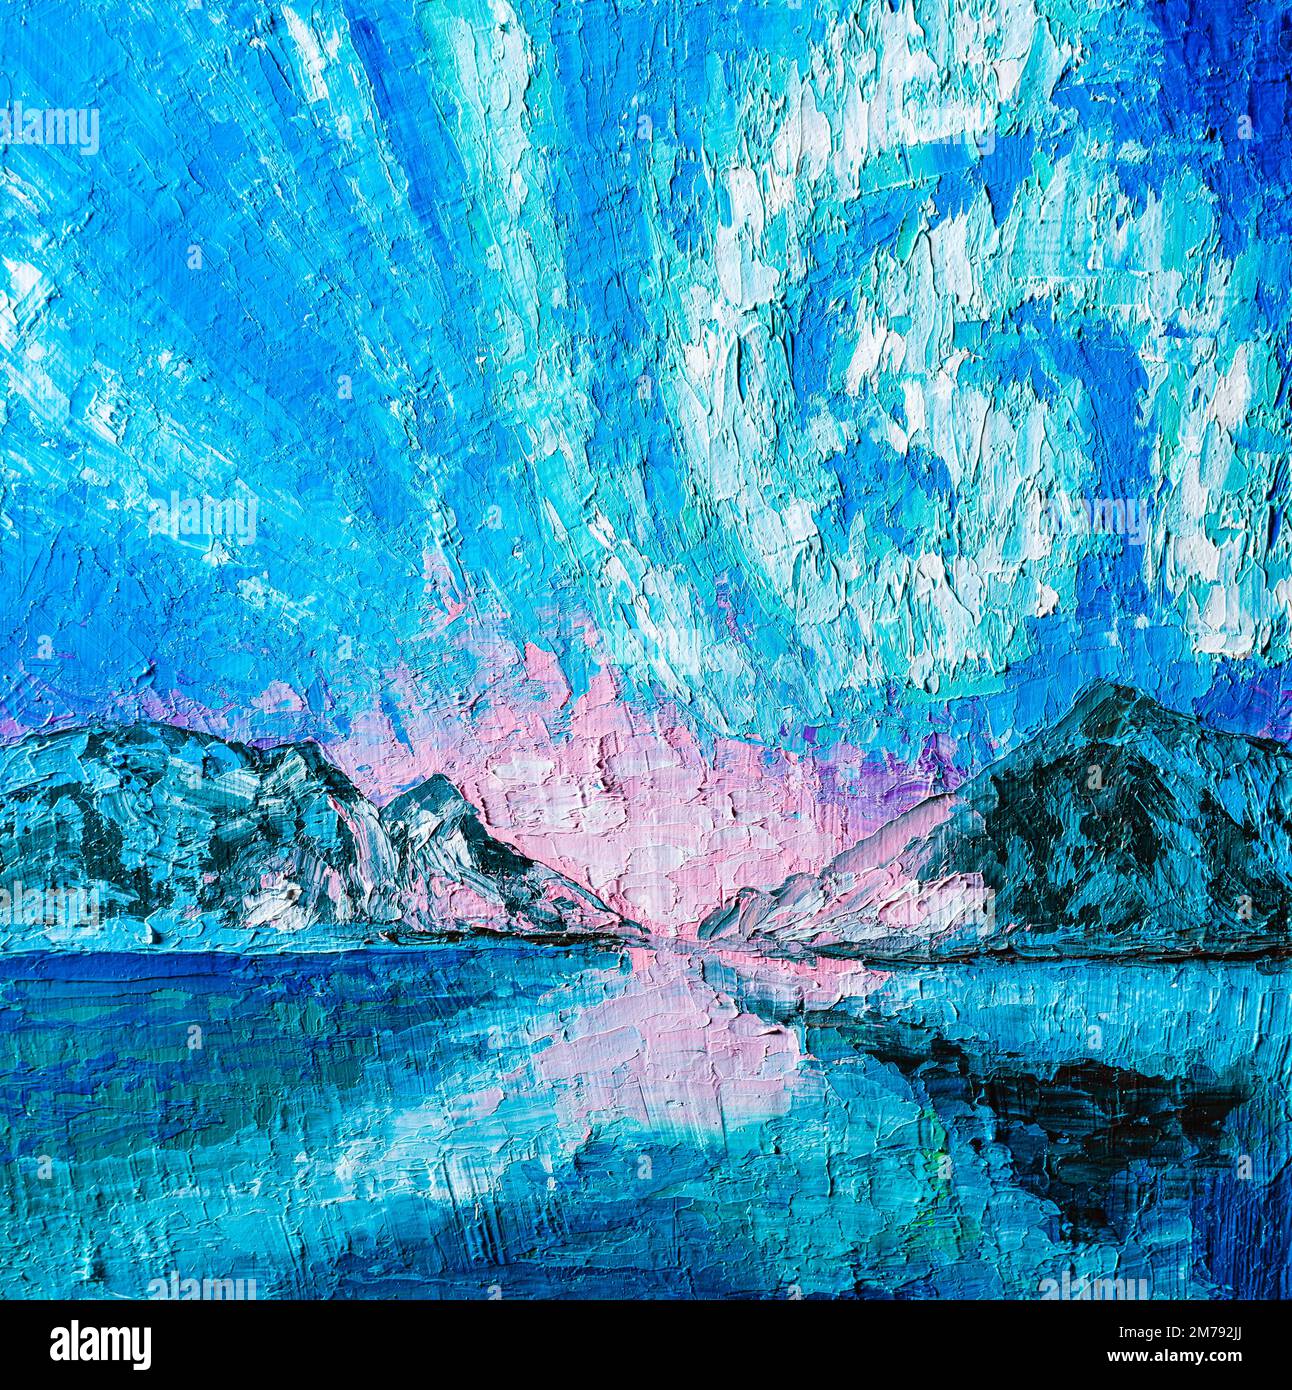 Northern Lights in Norway, oil painting. Stock Photo